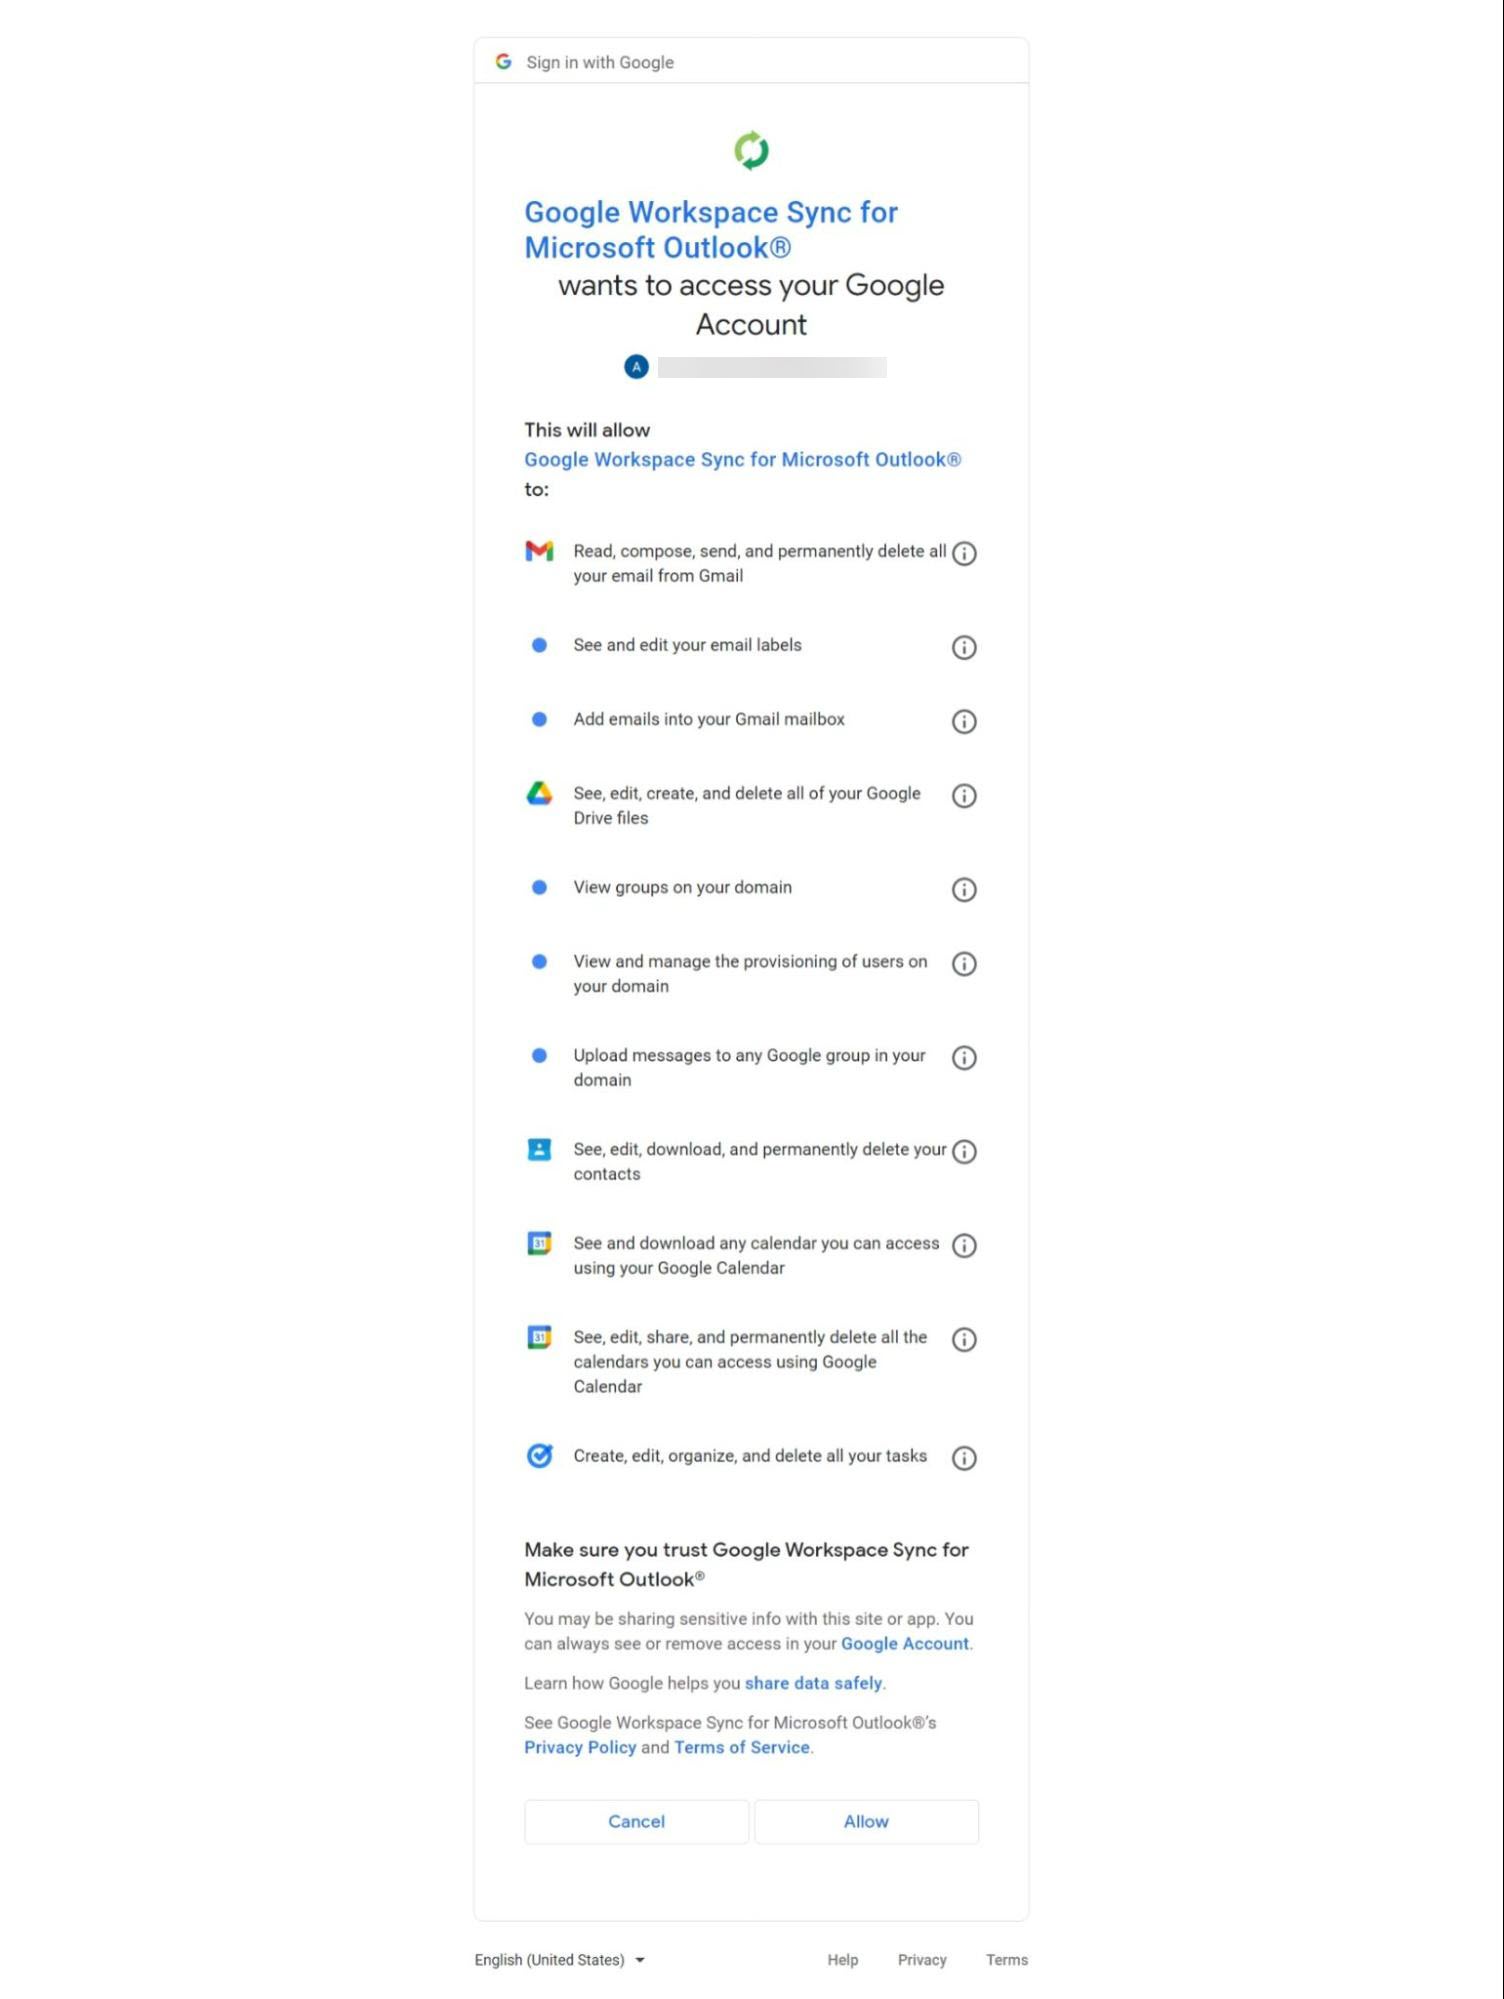 Google Workspace Sync for Microsoft Outlook